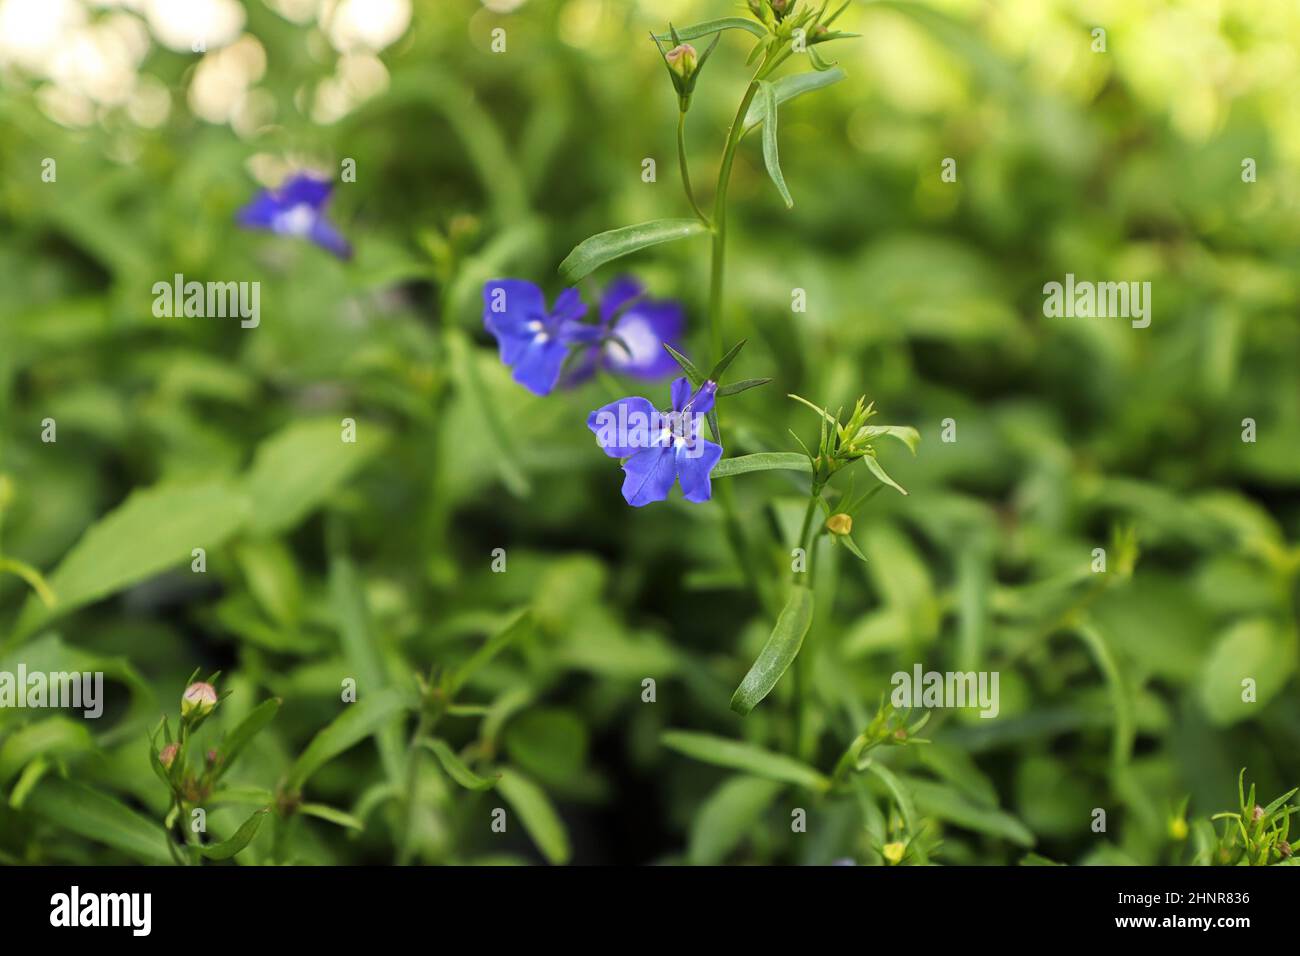 Tiny purple Indian Tobacco flowers blooming in spring. Stock Photo